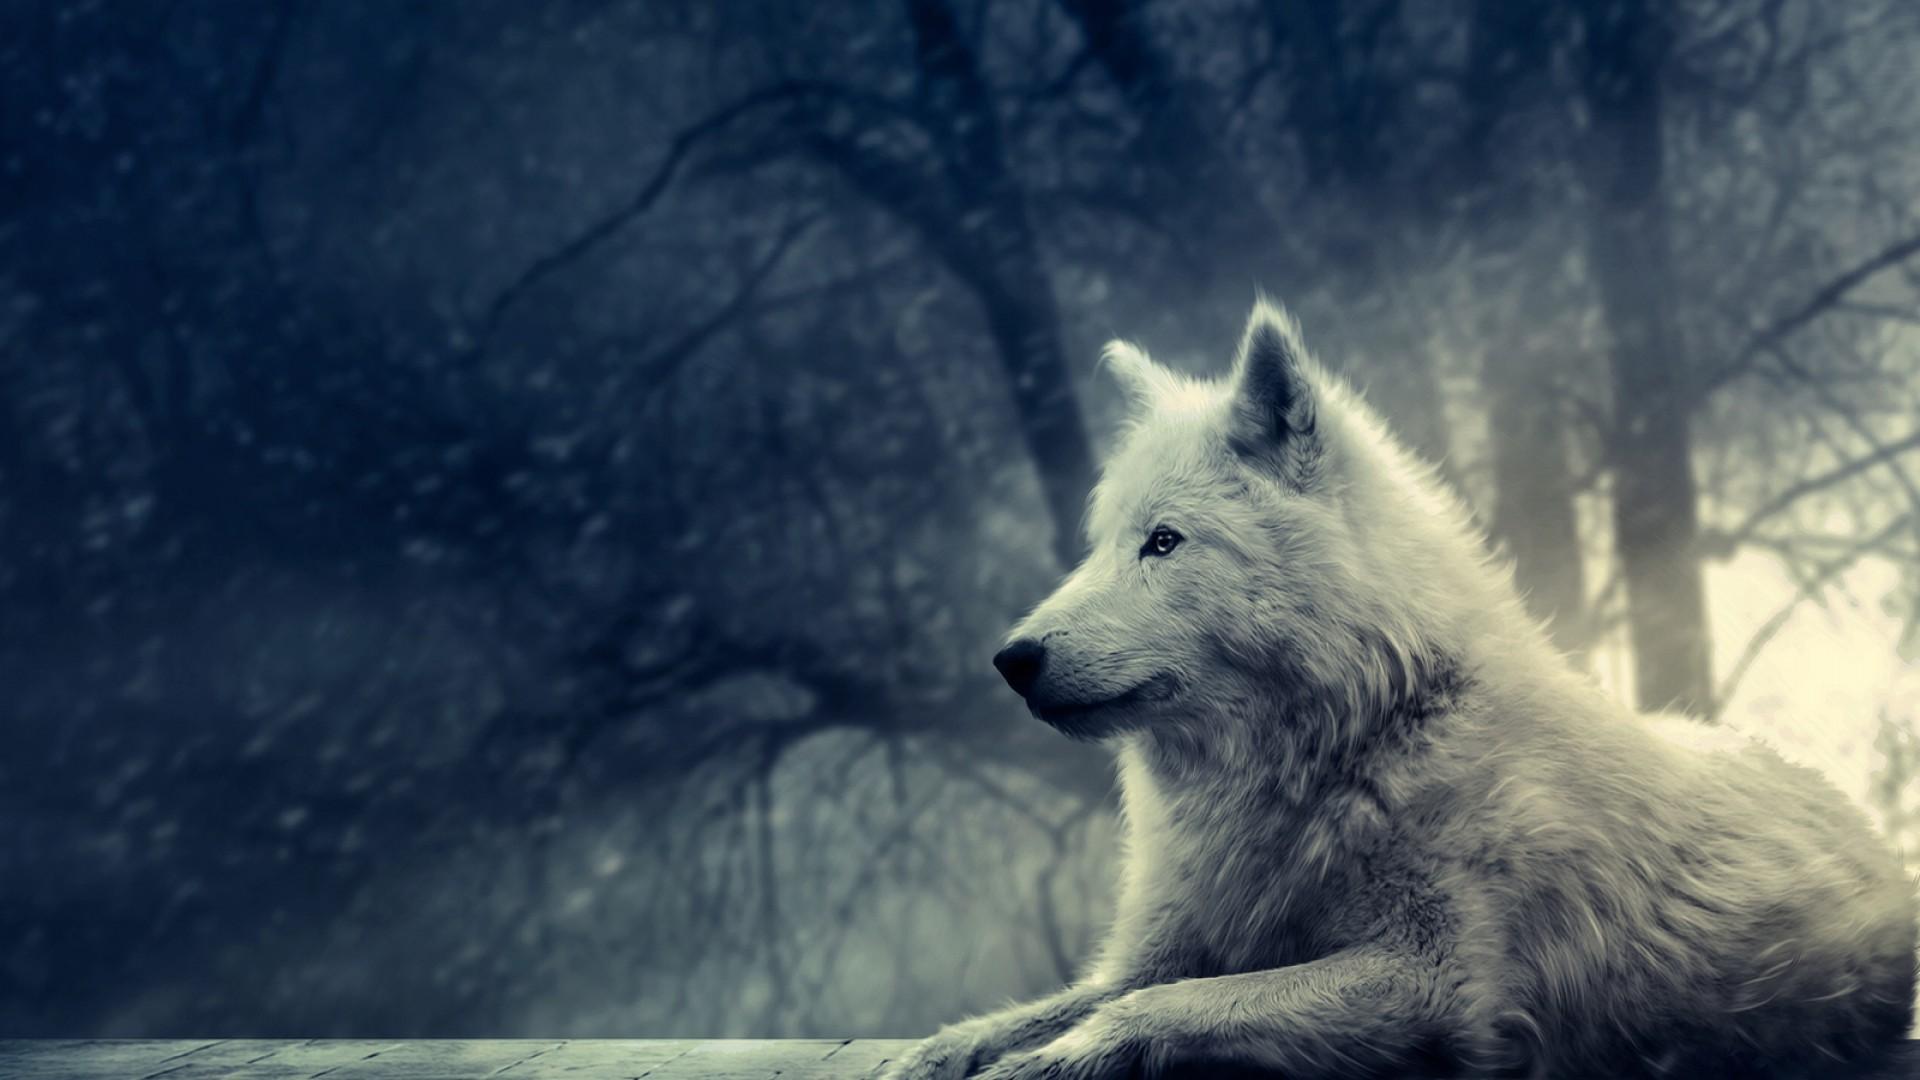 awesome hd wallpapers of wolf download best desktop background hd 1920x1080